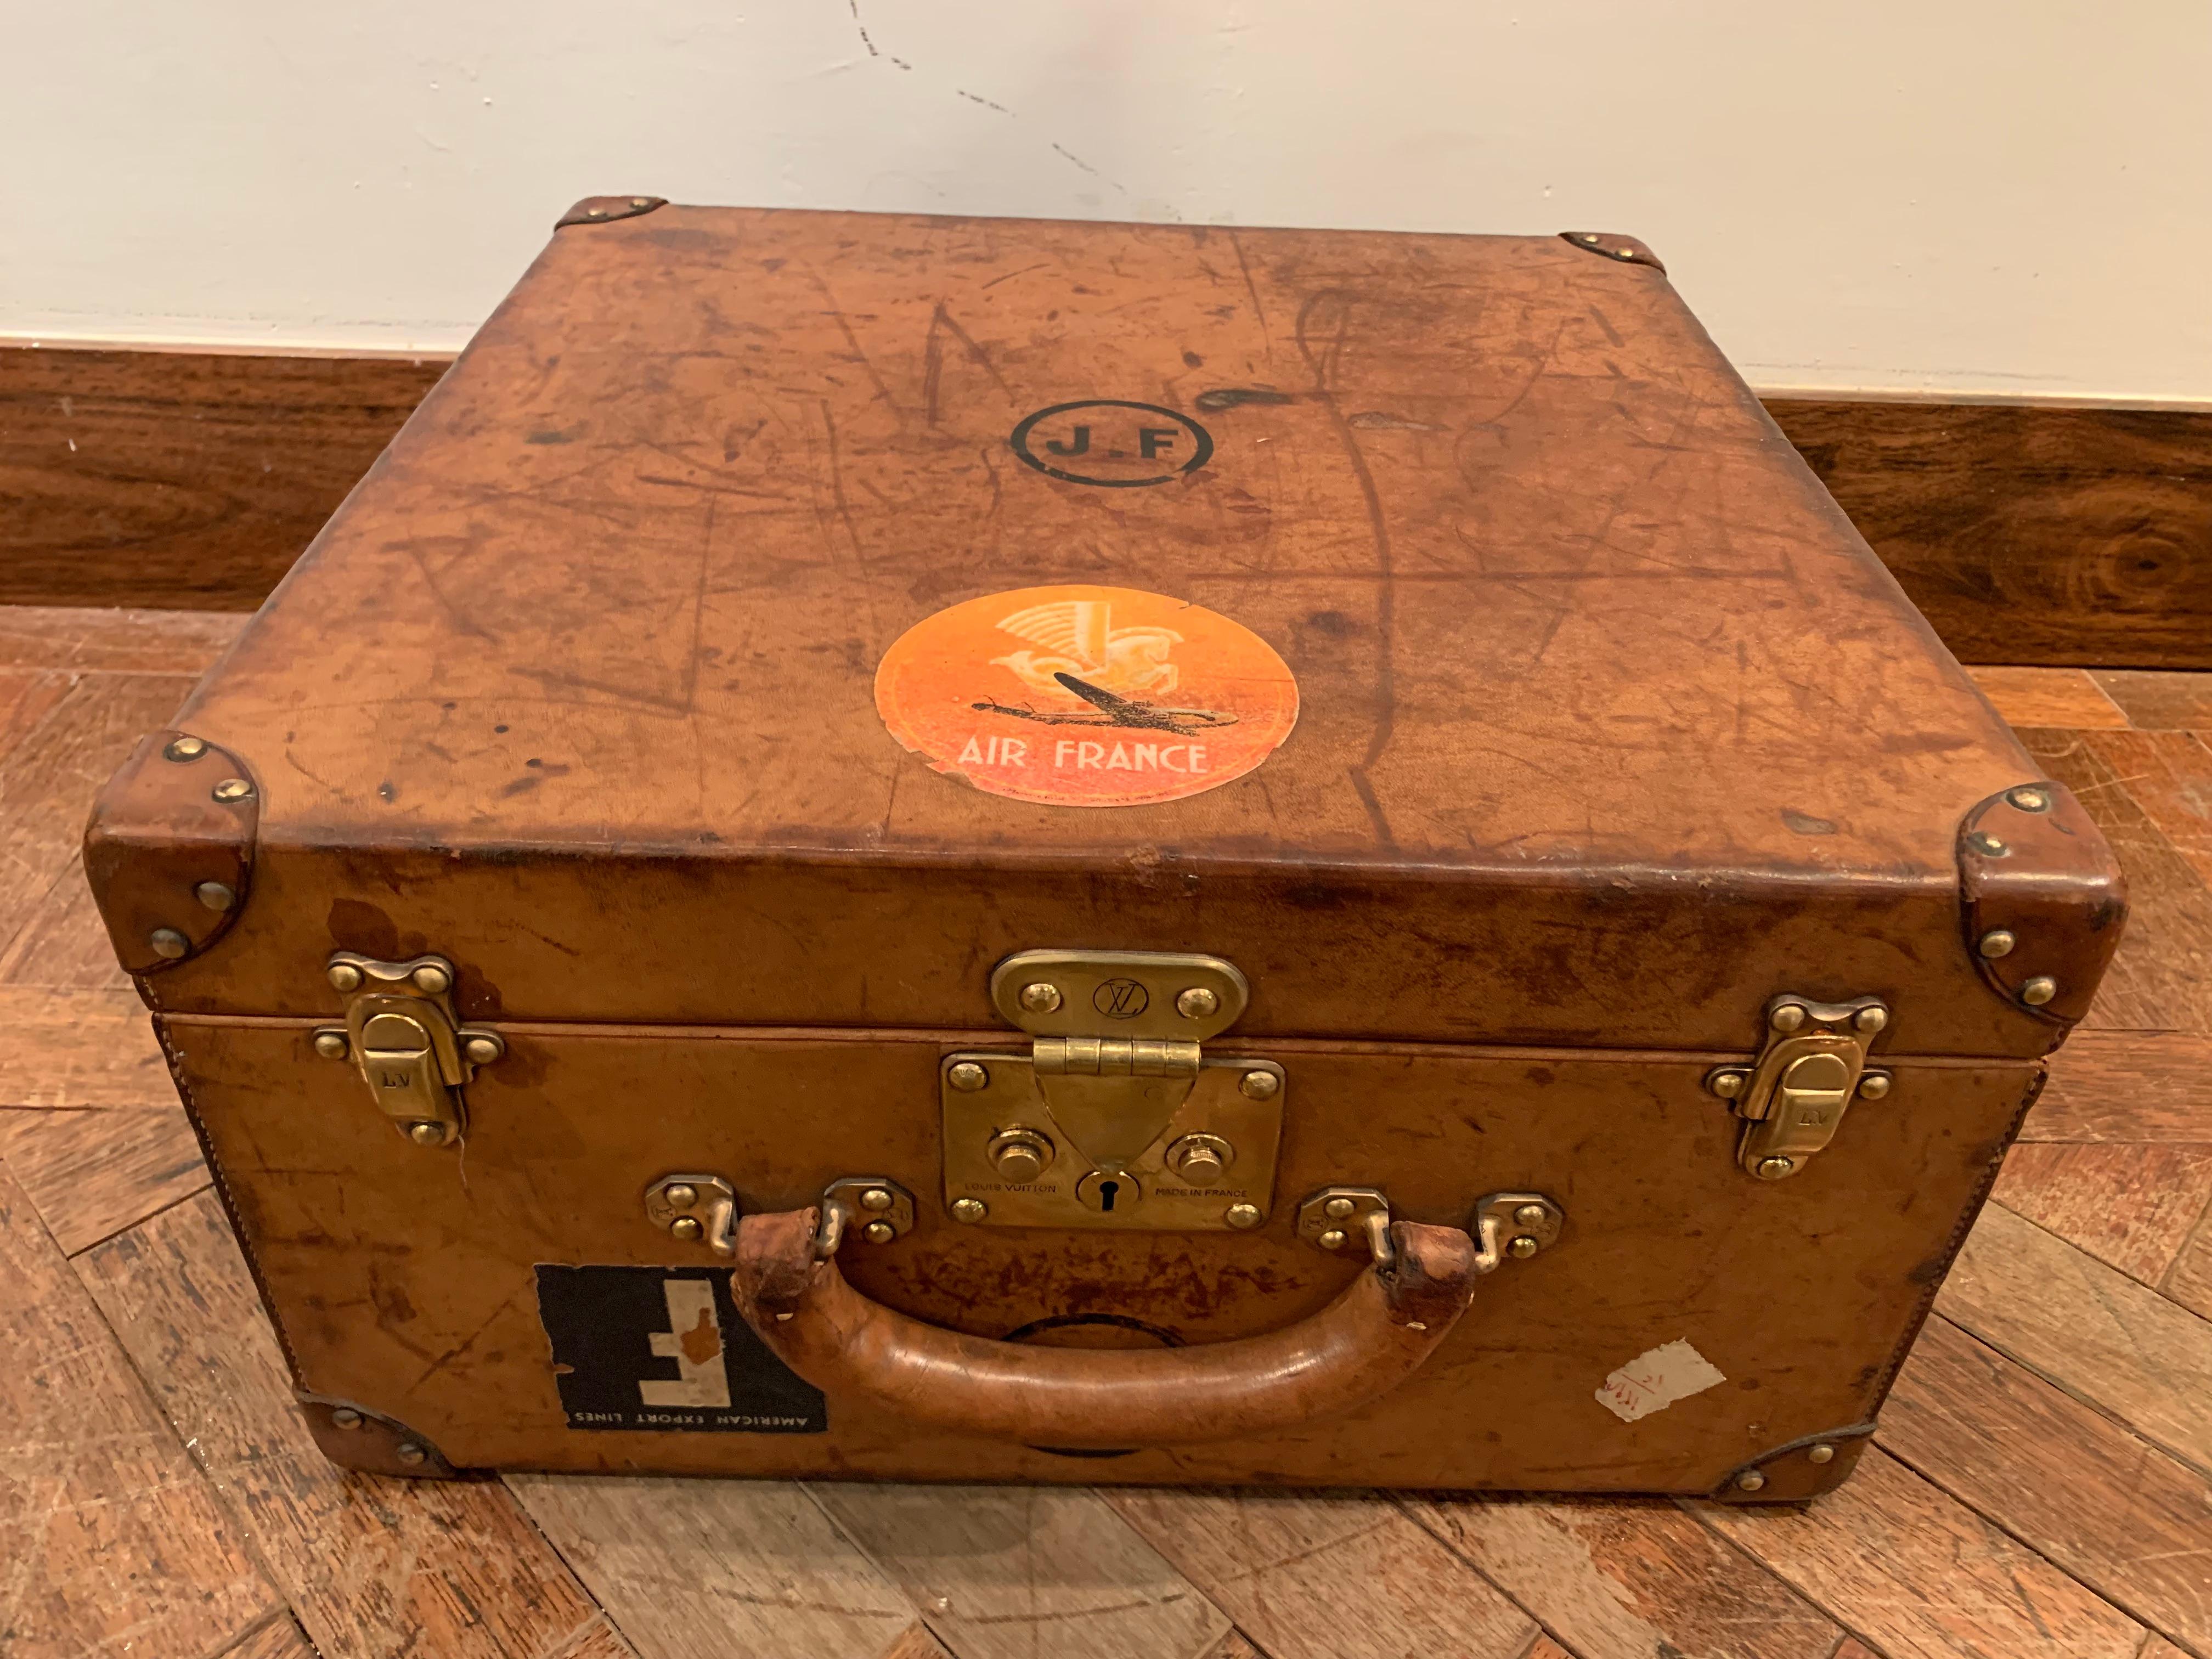 This beautiful Louis Vuitton leather suitcase features a light brown leather with marks of use and time, the initials OJ.F or J.FO are painted on the top of the suitcase.
Corners are made of leather and nailed to the suitcase by brass nails.

The